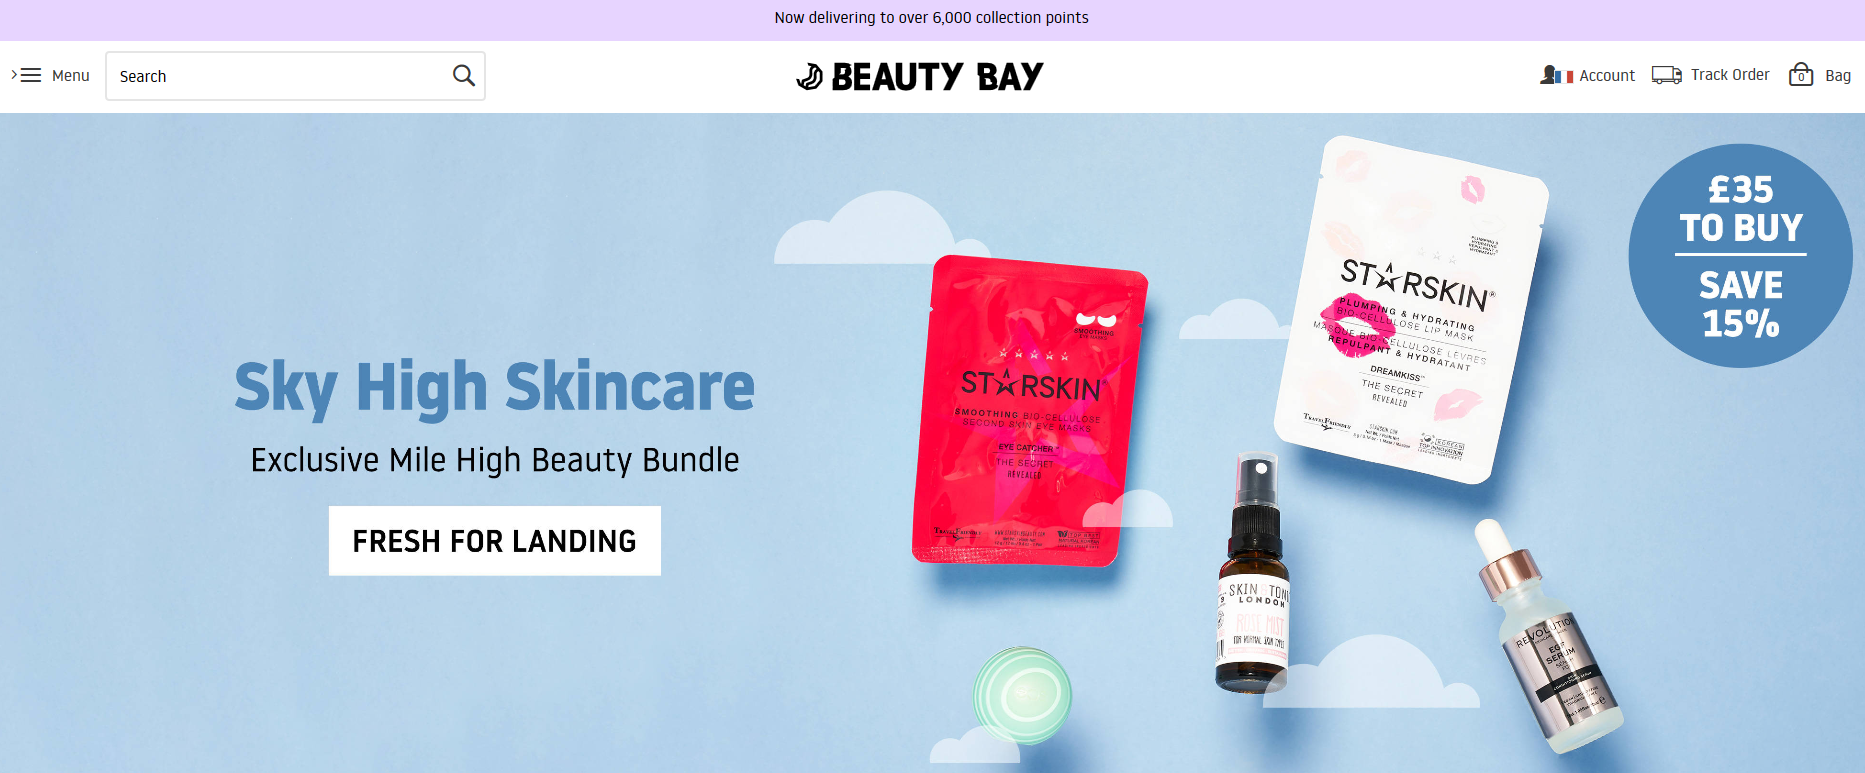 Page accueil Beauty Bay